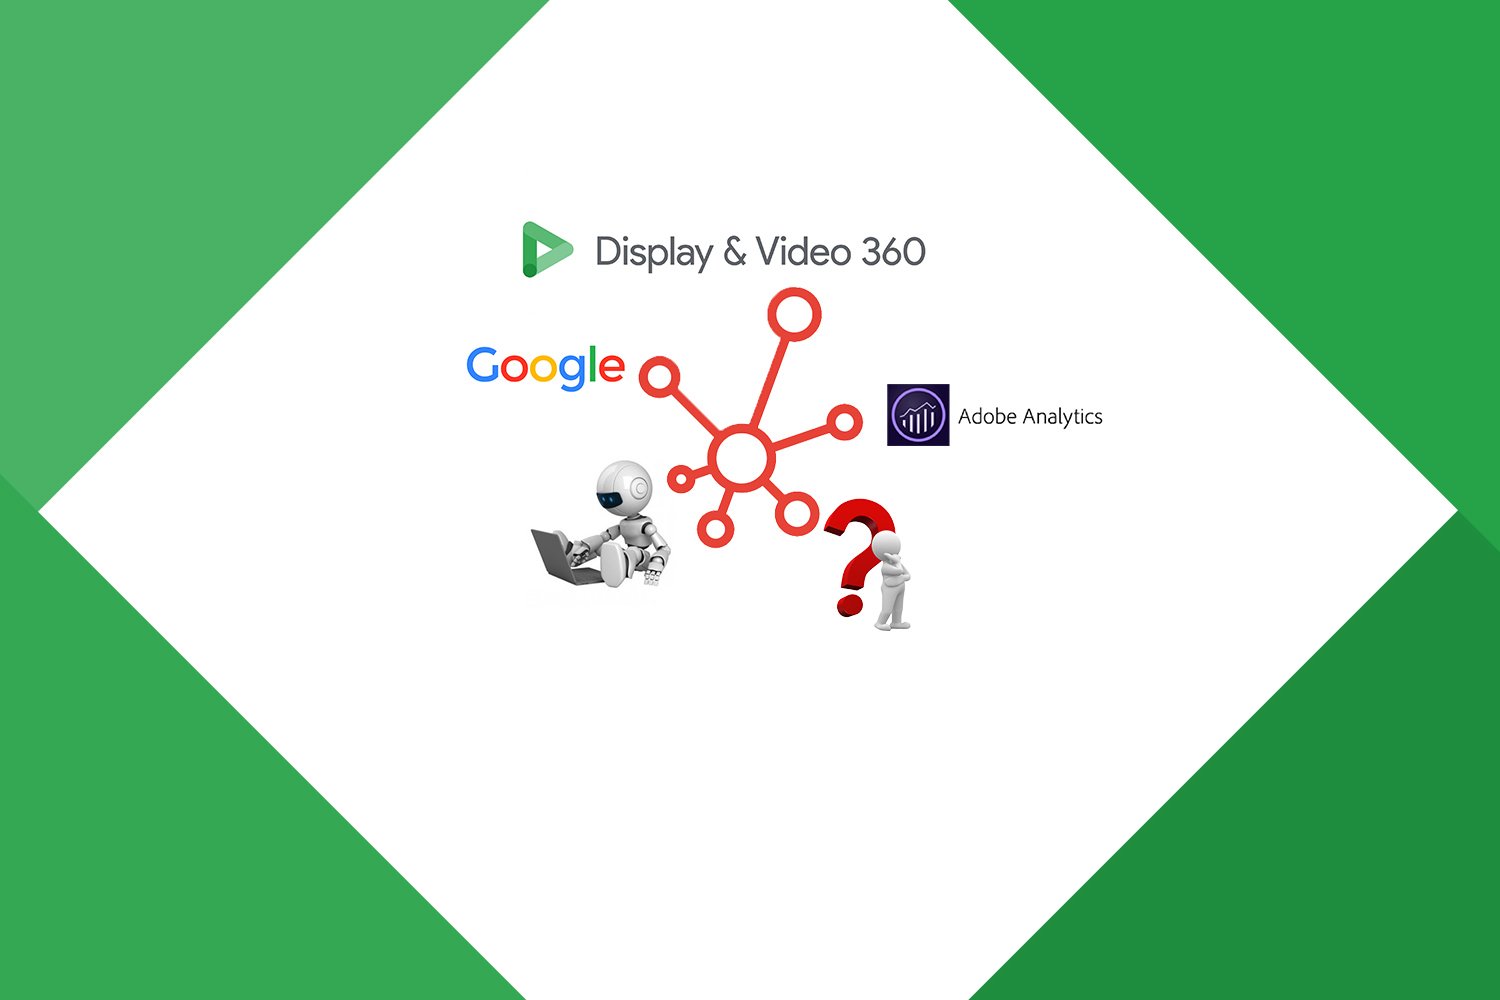 Not reported Google DV360 campaign traffic problem